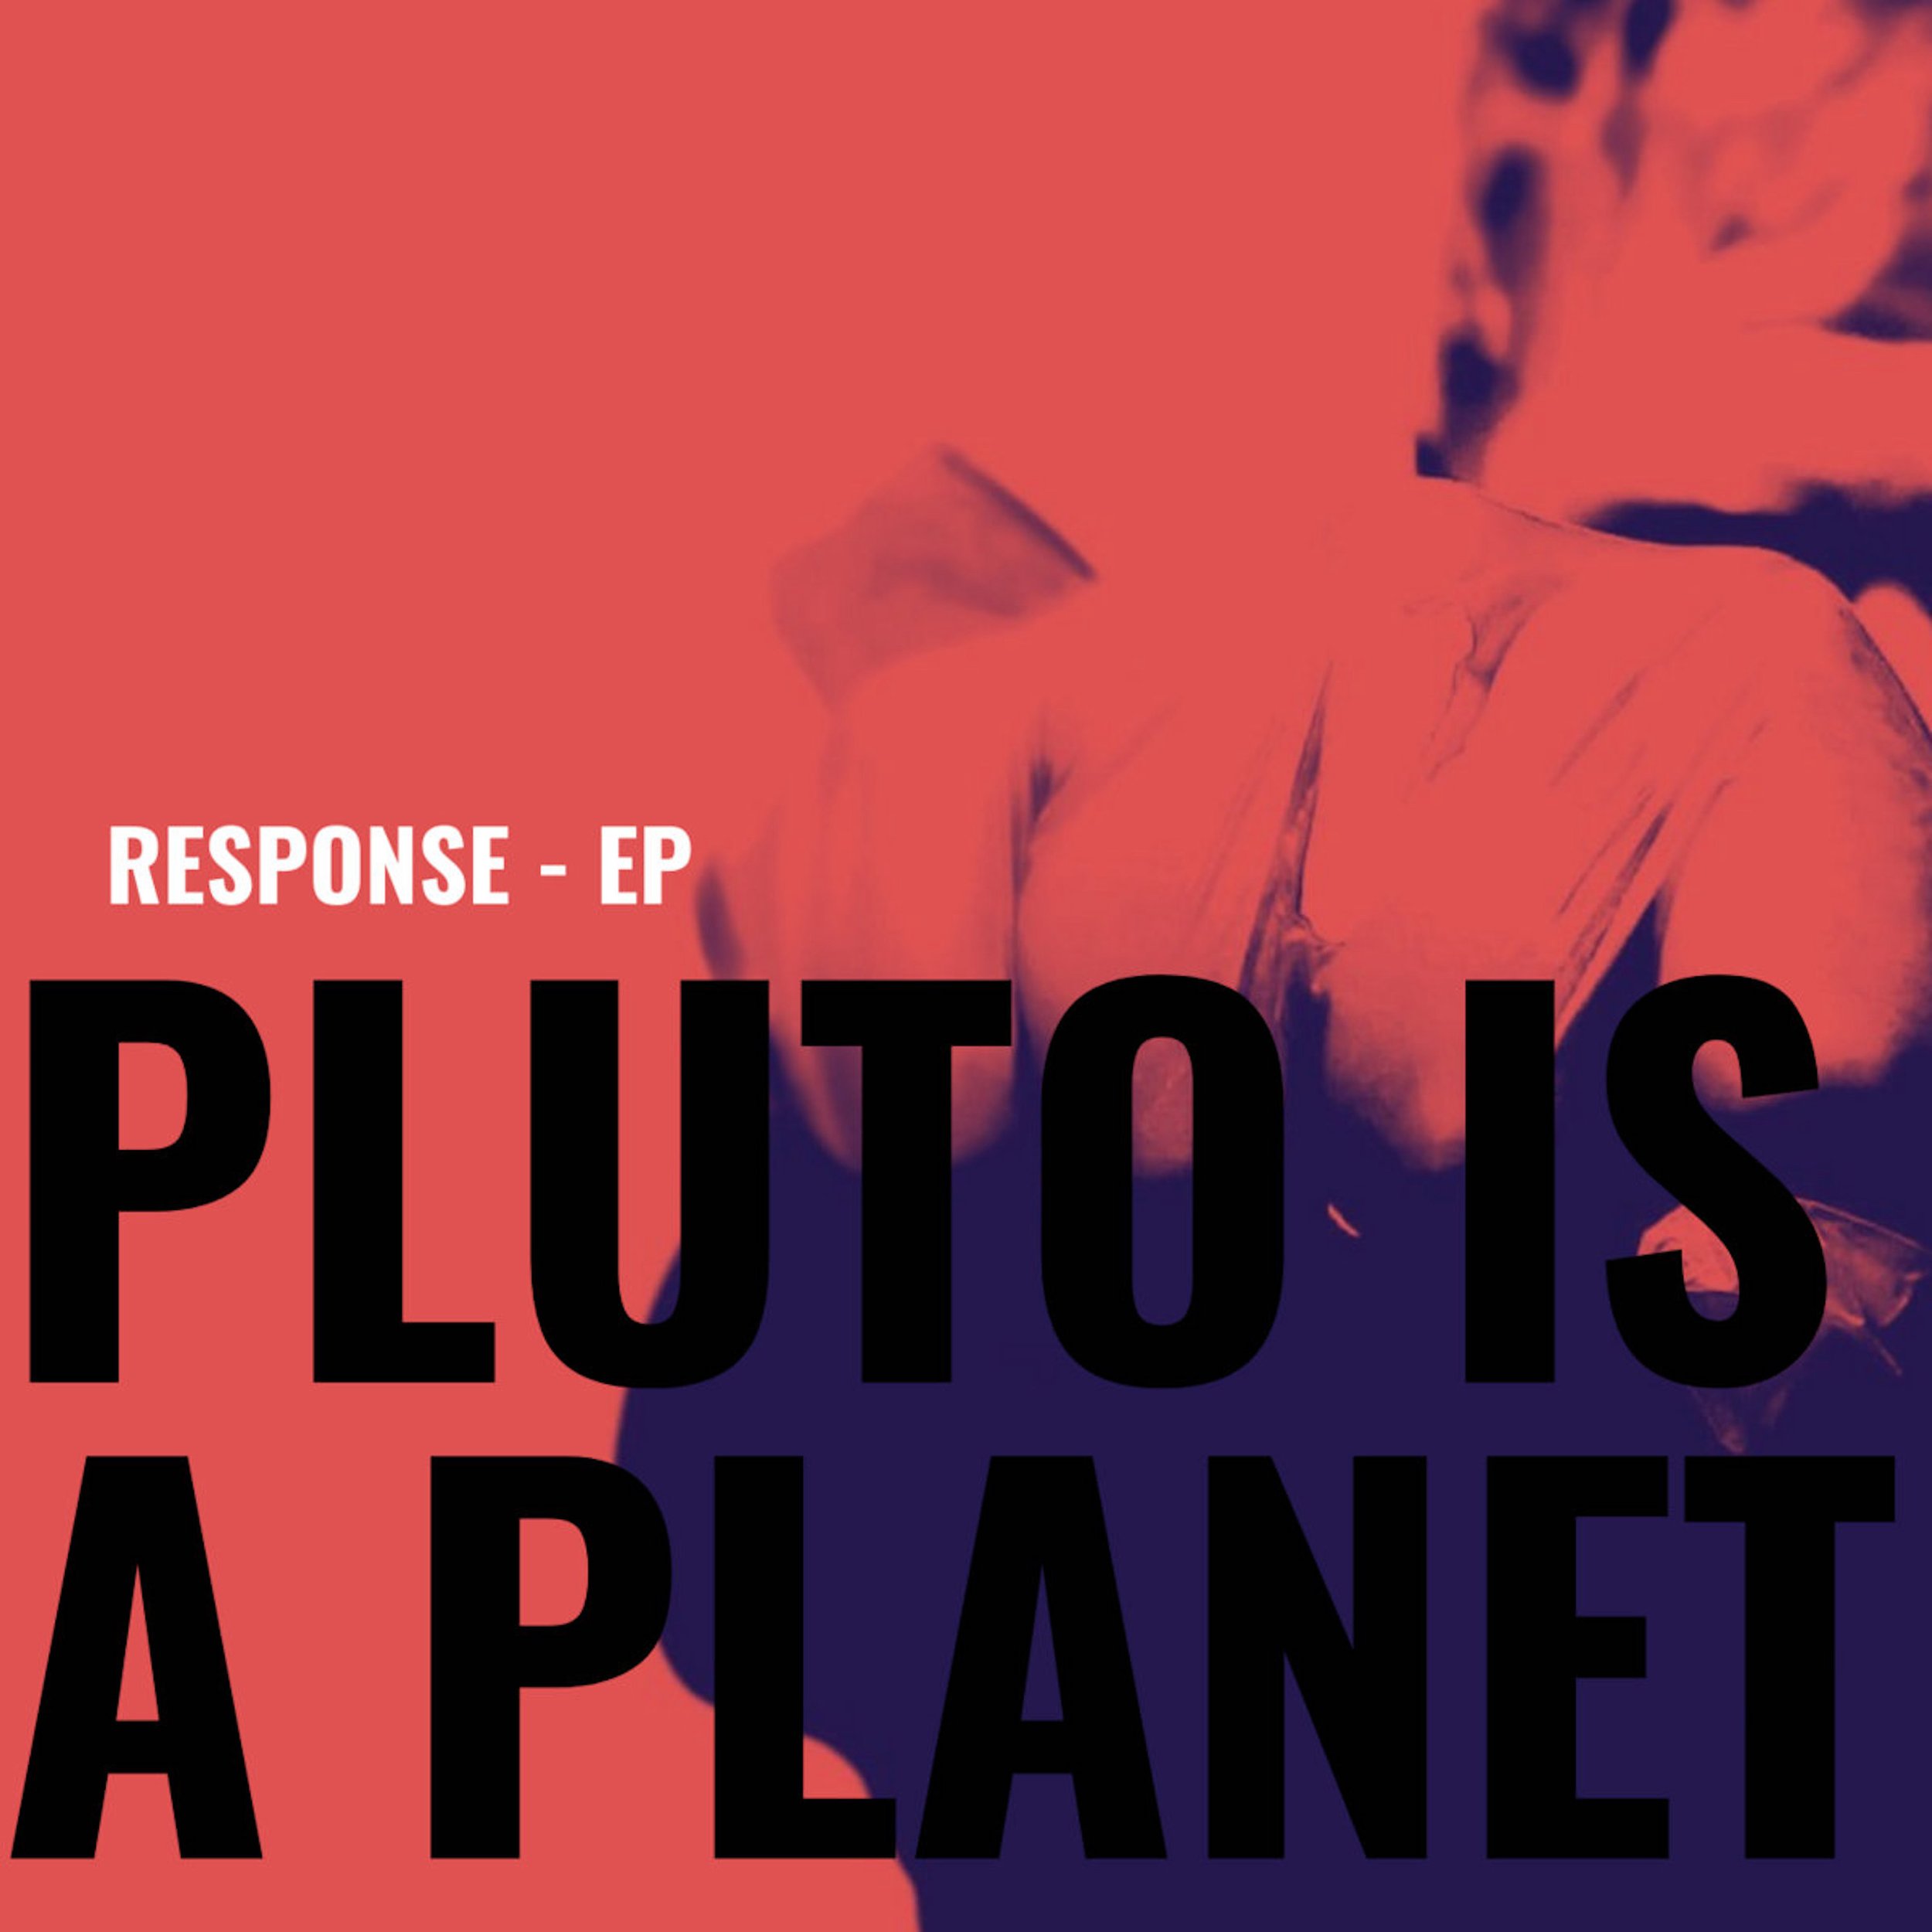 Pluto Is A Planet - Response EP.jpeg